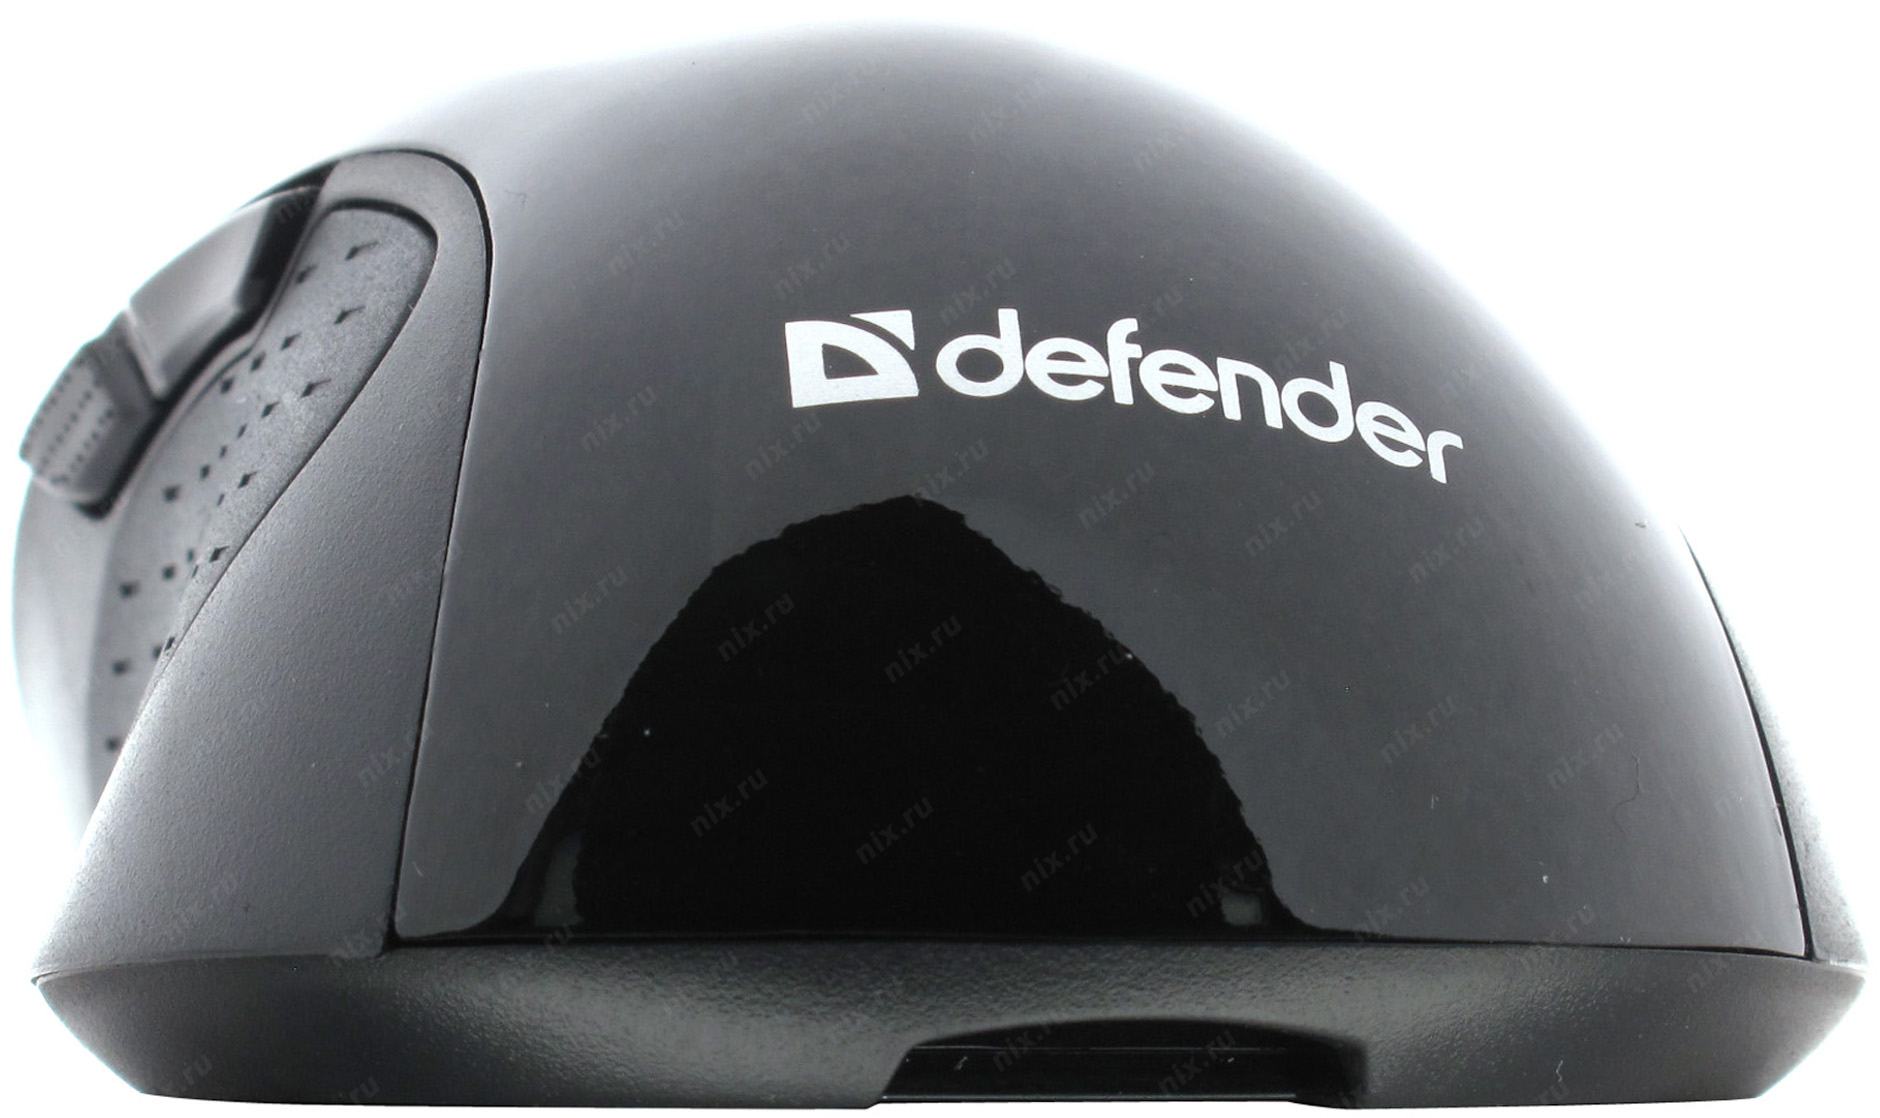 Defender touch mm. Wireless Optical Mouse Verso mm395. Cobra Nano Black.